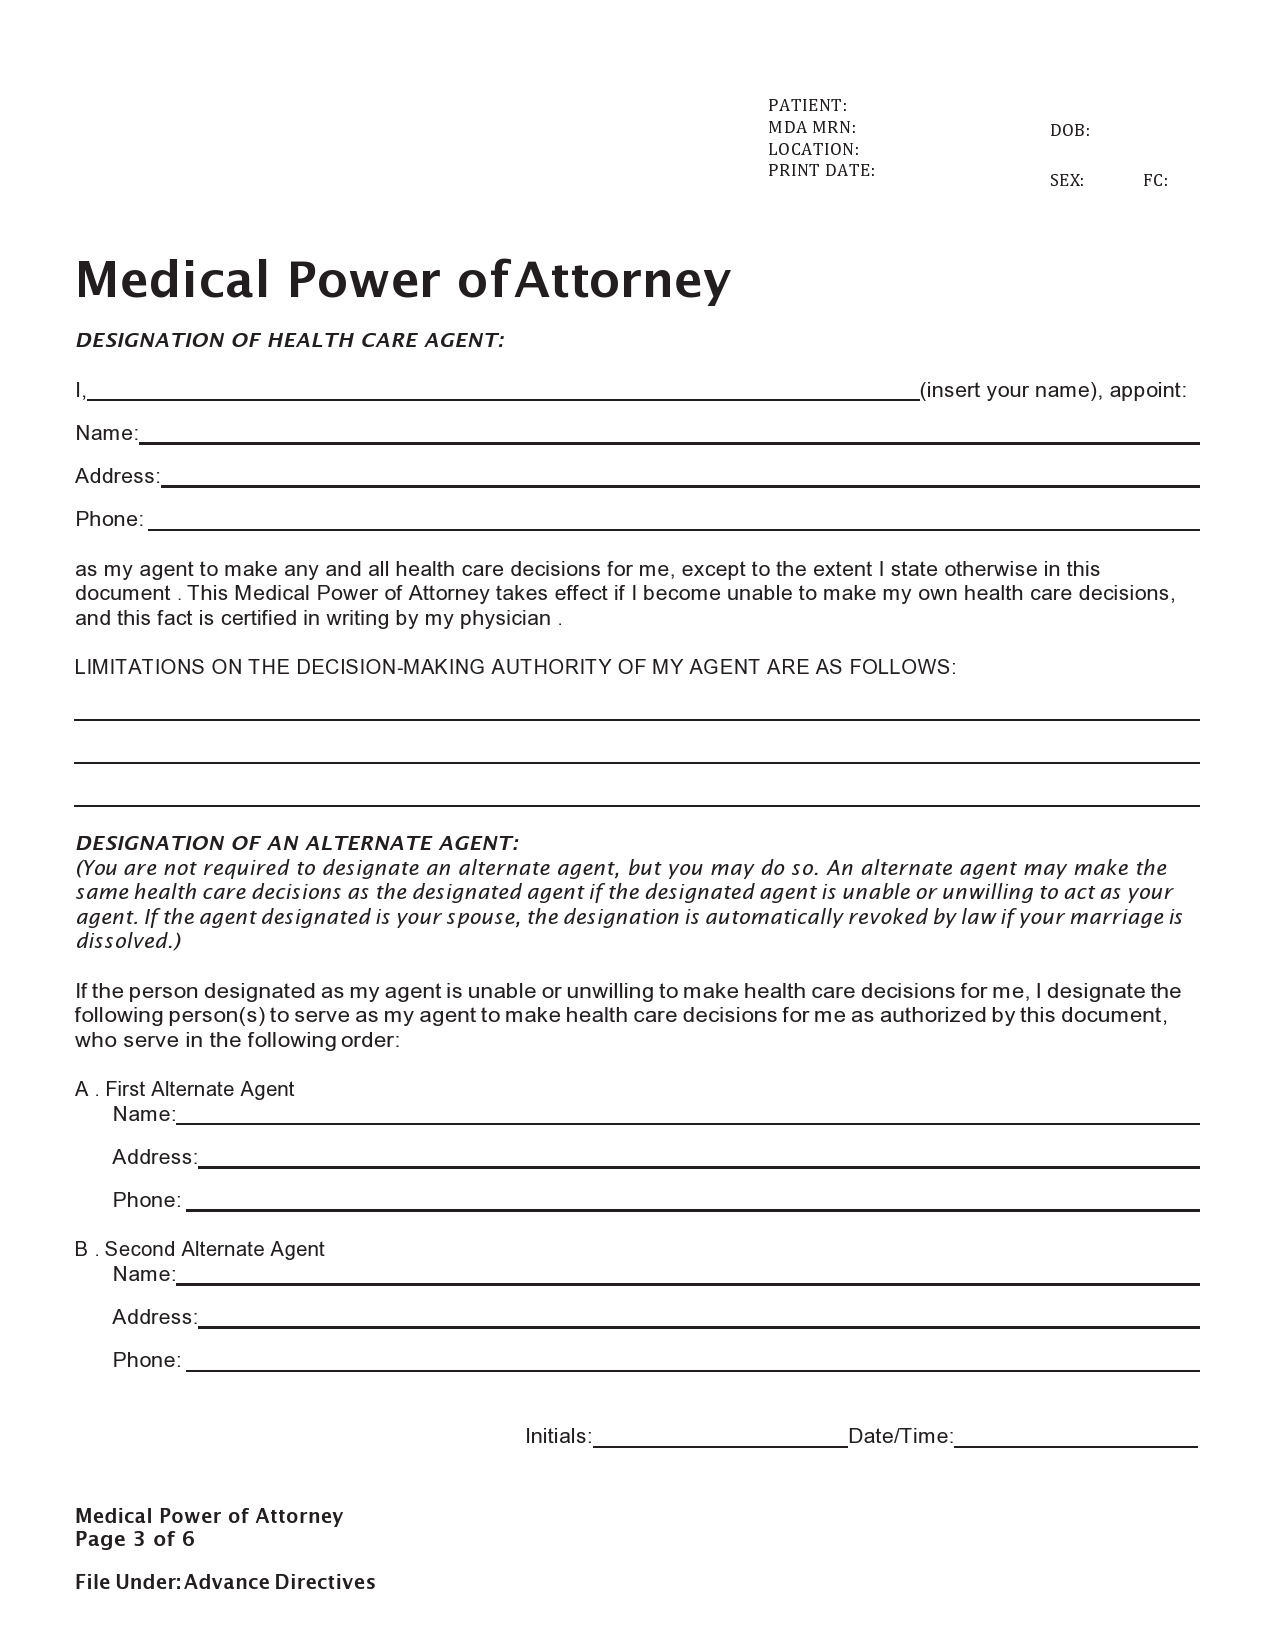 Free medical power of attorney 10